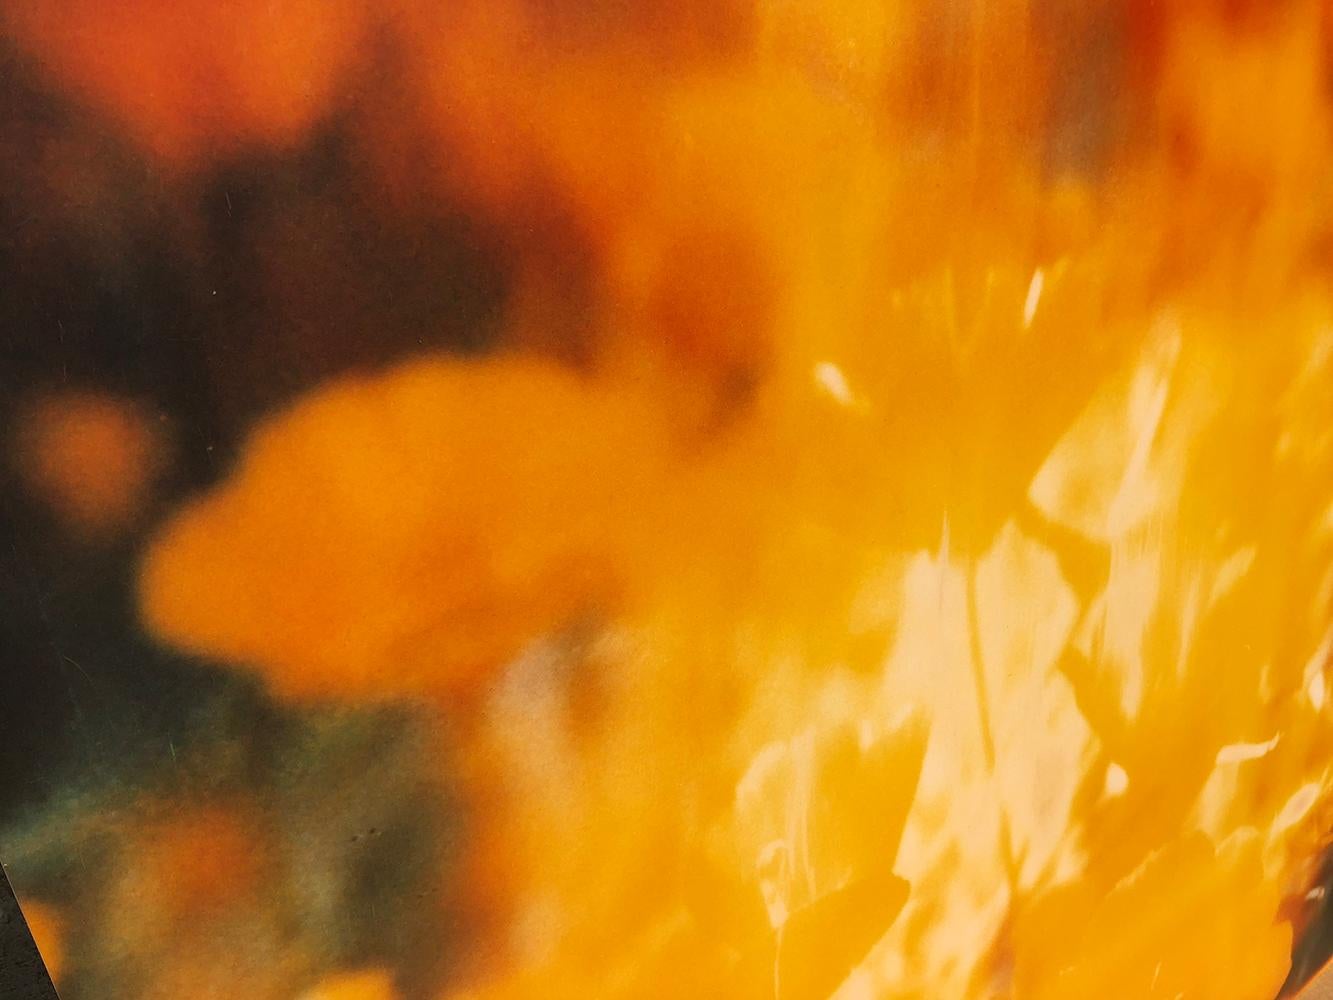 Yellow Flower (The Last Picture Show) 
128x125cm, 2005, Edition 4/5, 
analog C-Print, hand-printed by the artist on Fuji Crystal Archive Paper, 
based on a Polaroid, signed on verso, Artist Inventory 672.04. 
Mounted on Aluminum with matte